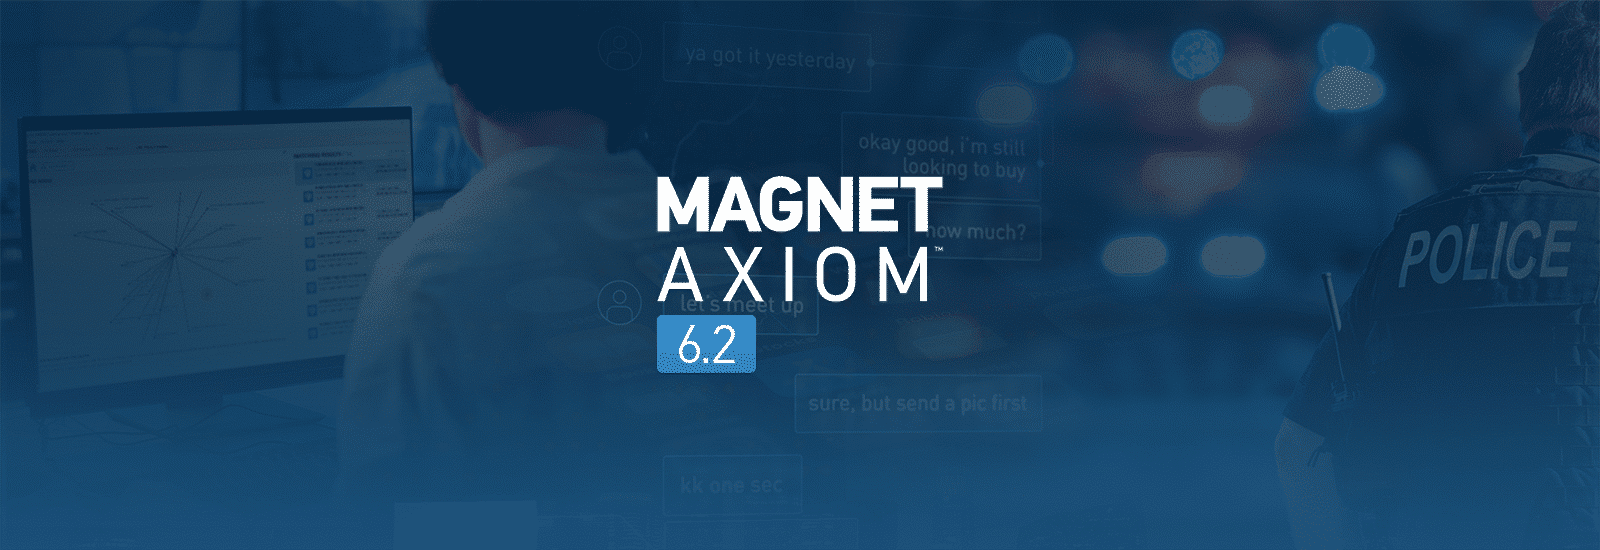 A decorative header for the Magnet AXIOM 6.2 release